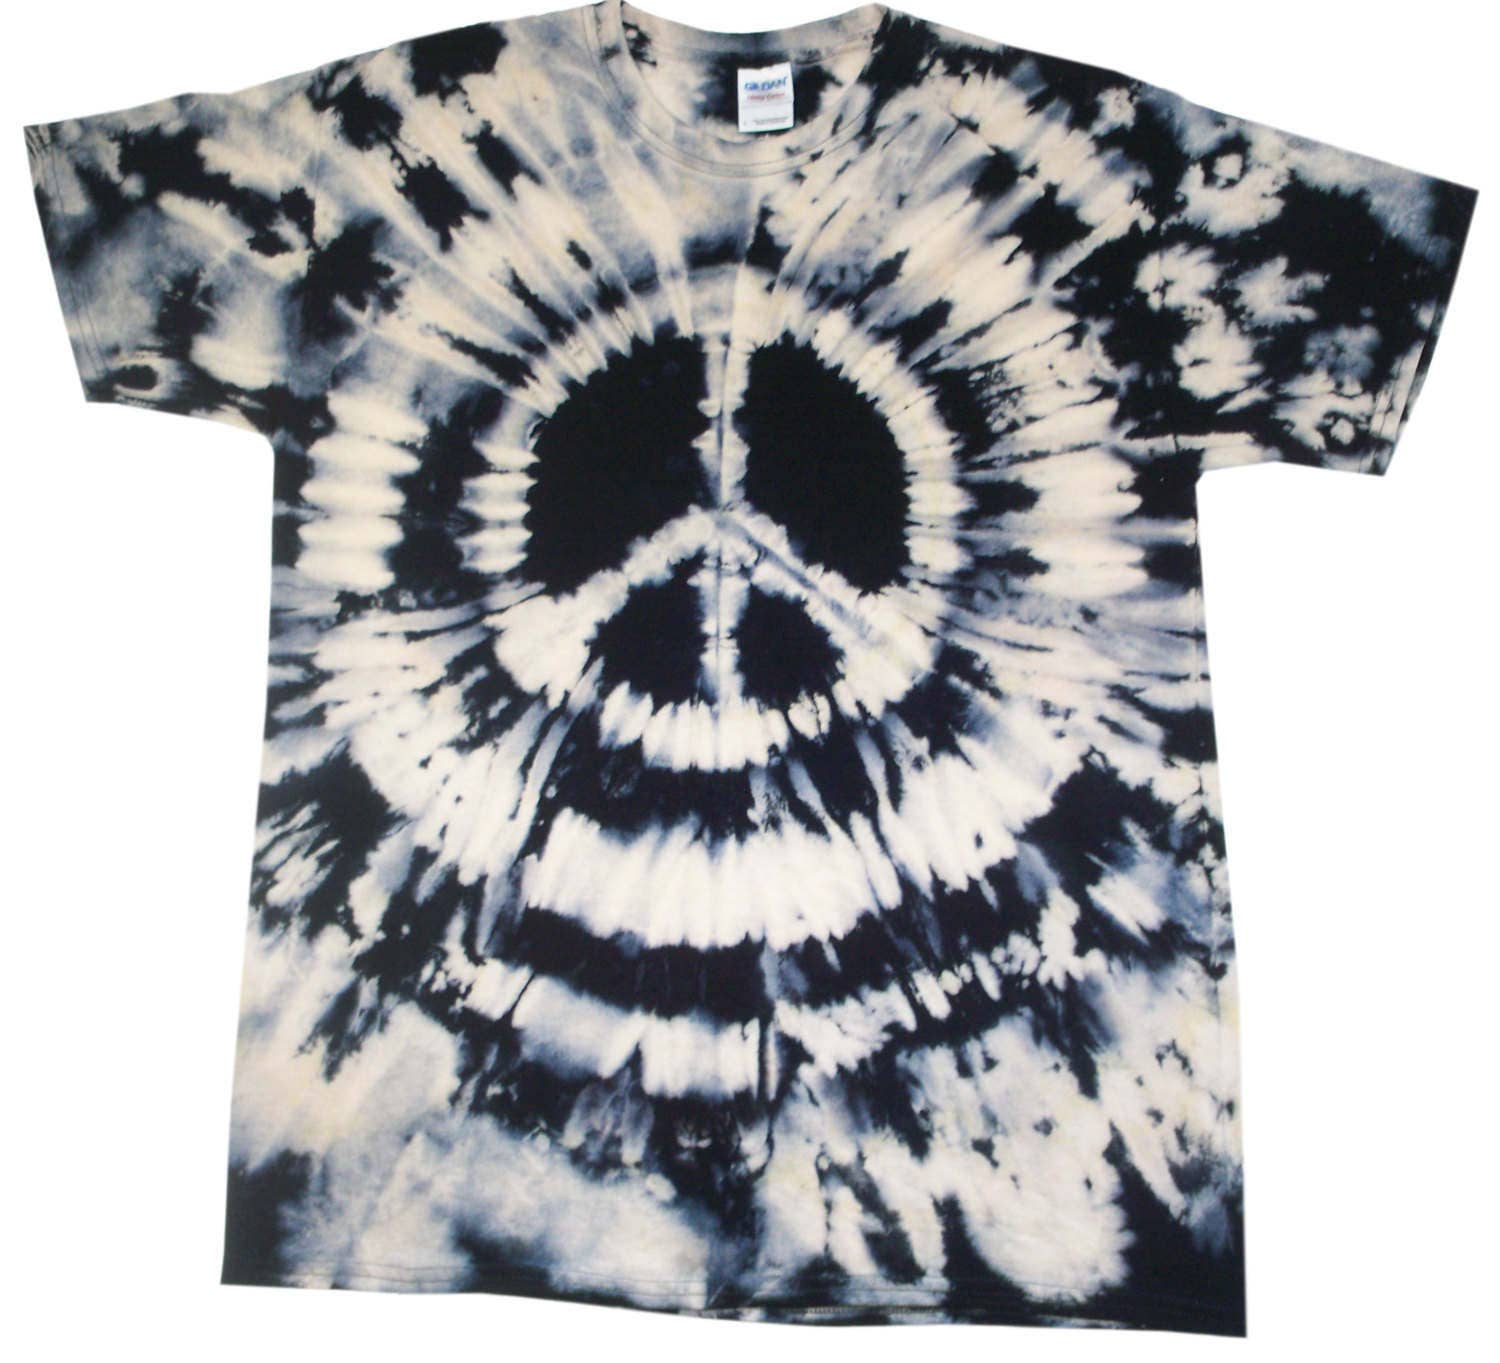 Green and Black Scrunch tie dye t shirt, hand dyed in the U.K